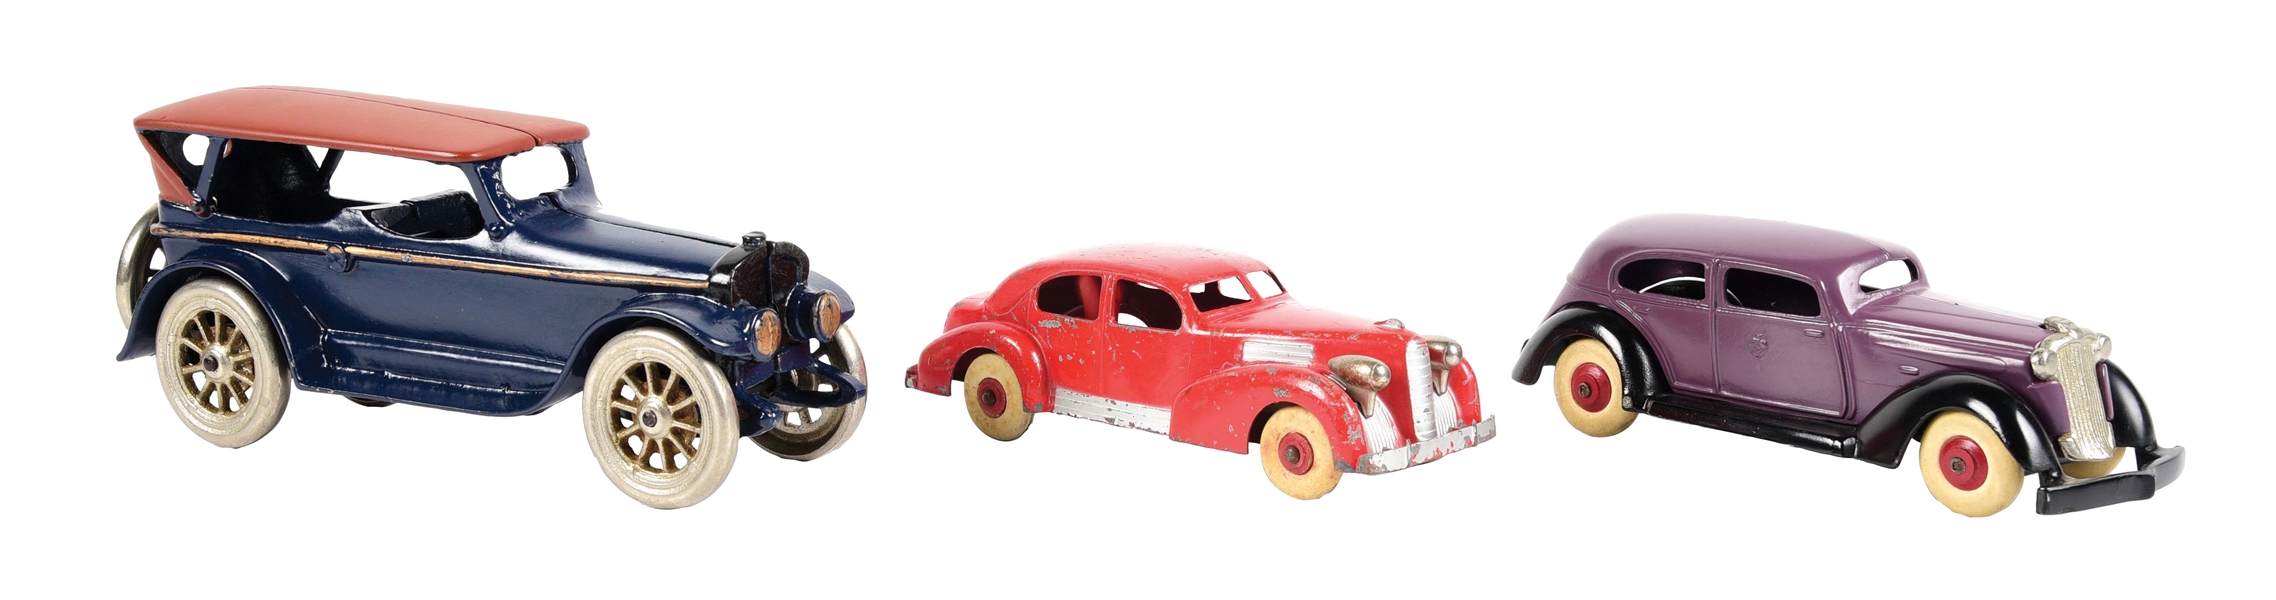 LOT OF 3: BLUE, RED AND PURPLE CAST IRON TOWN CARS.